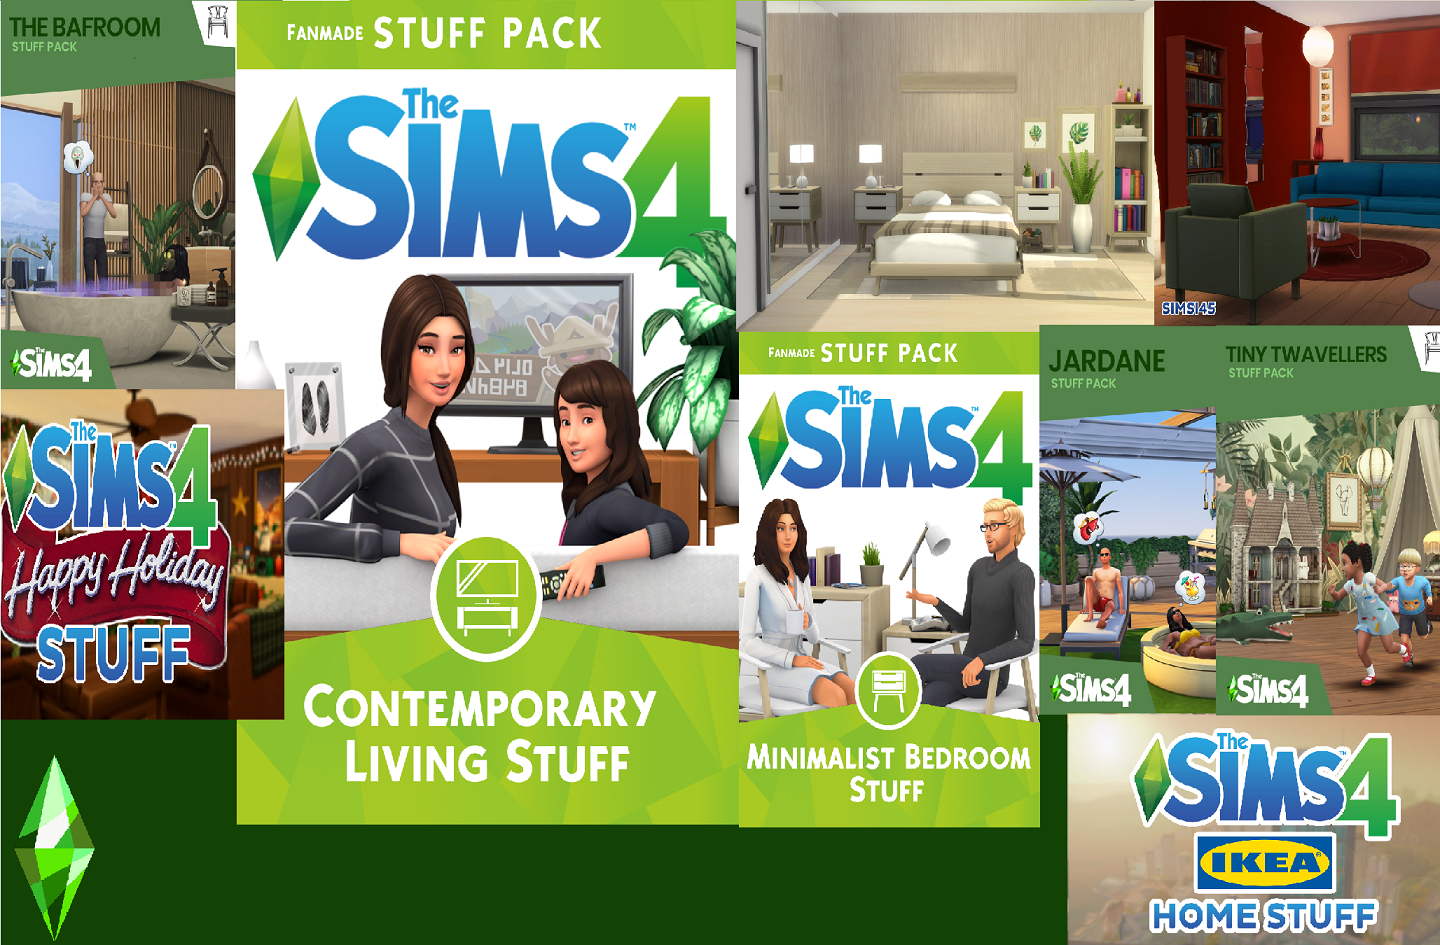 download the sims 4 mod apk